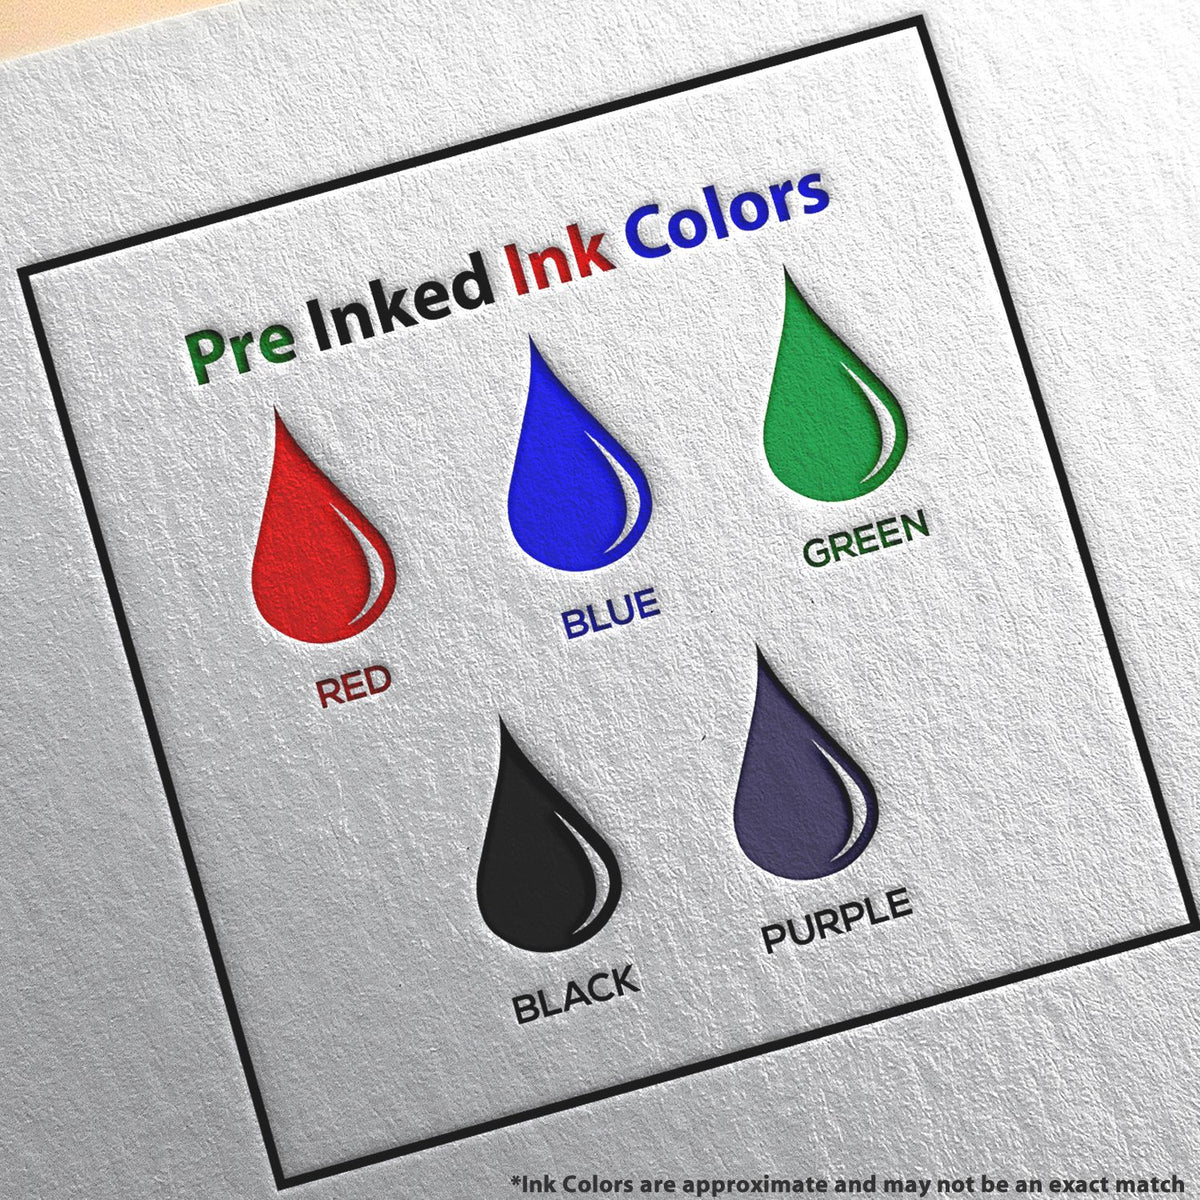 A picture showing the different ink colors or hues available for the Slim Pre-Inked Washington Architect Seal Stamp product.